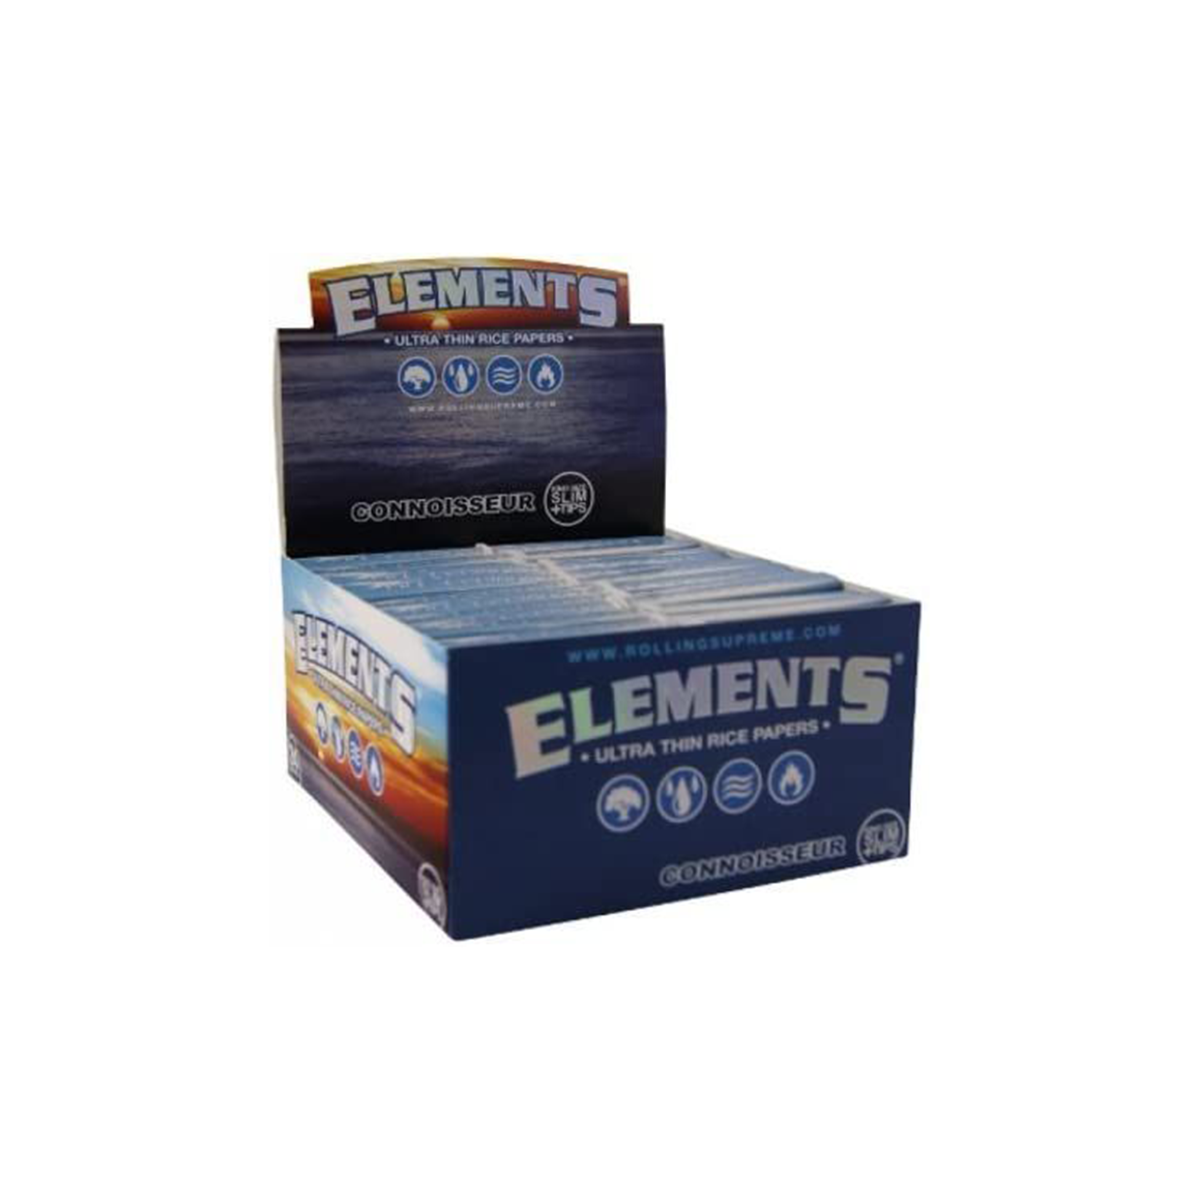 Elements KS Rice Papers + Tips